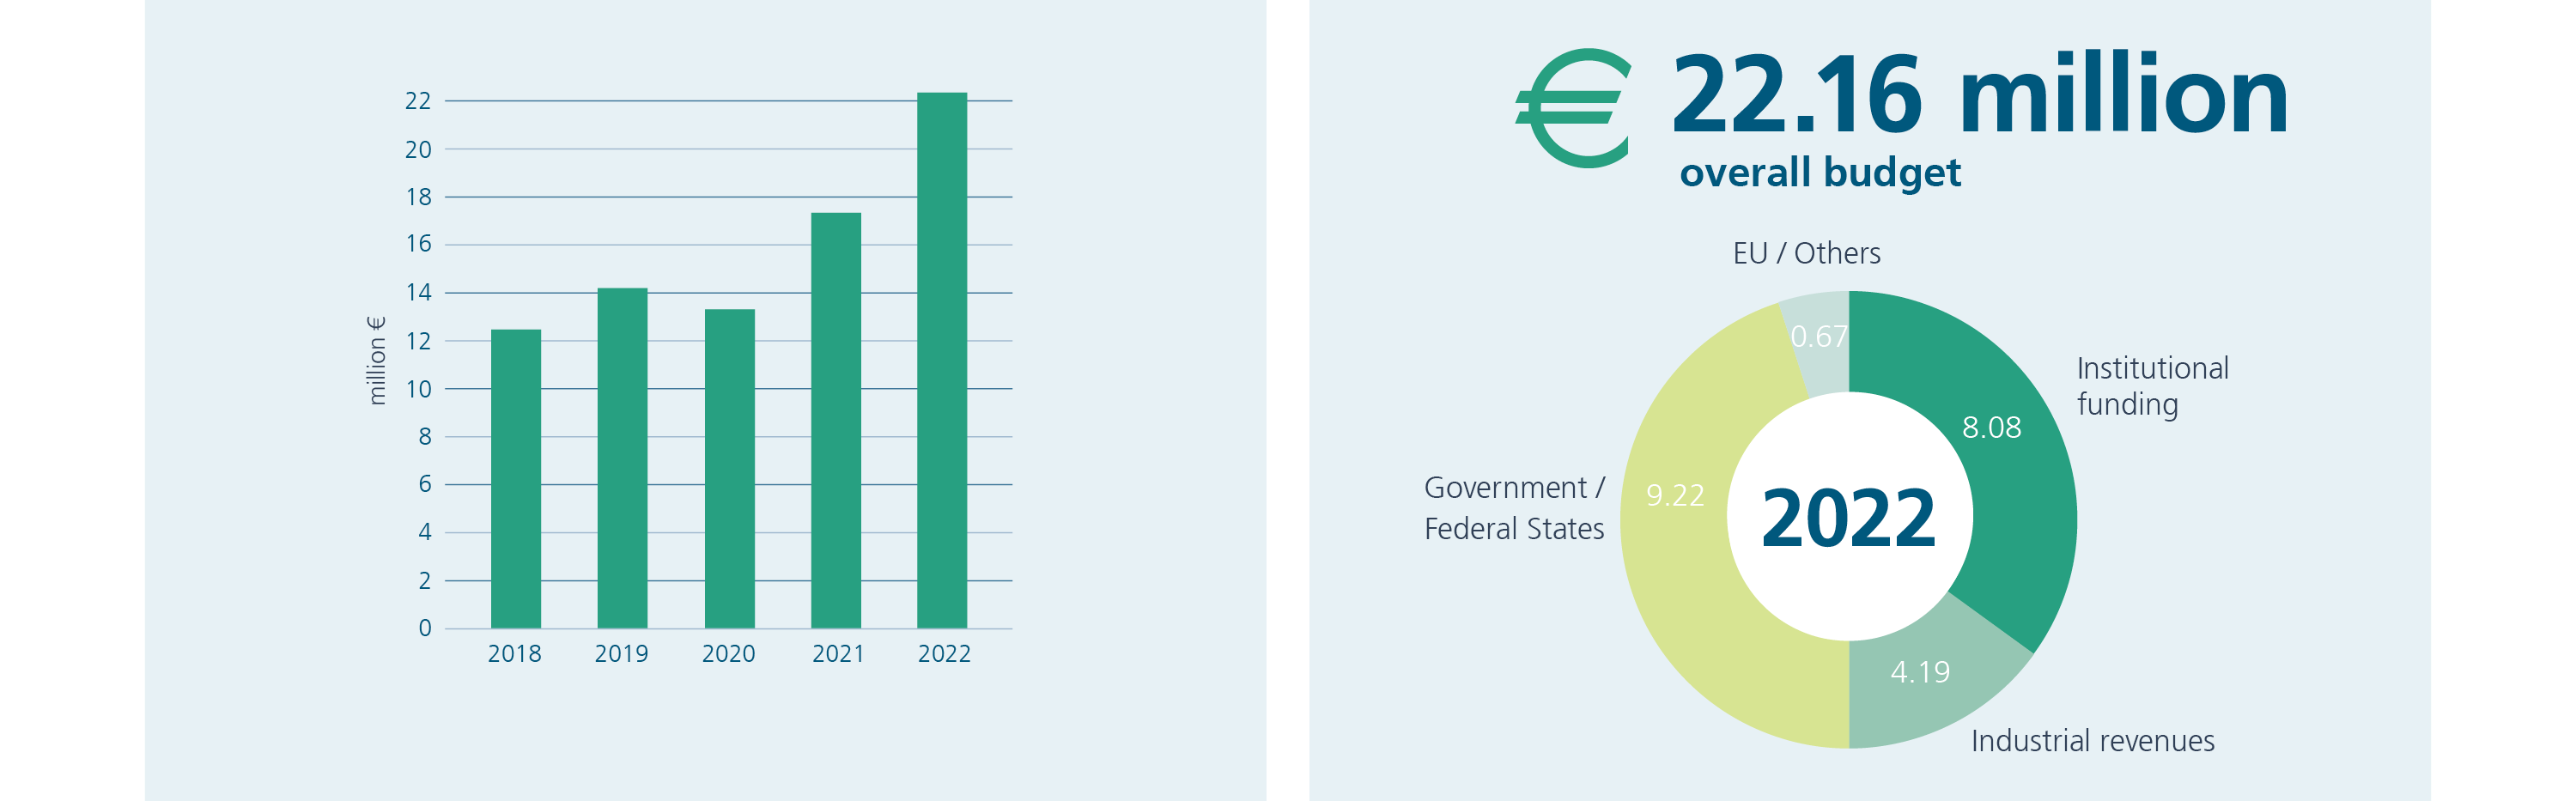 Development overall budget of the Fraunhofer IST 2018-2022